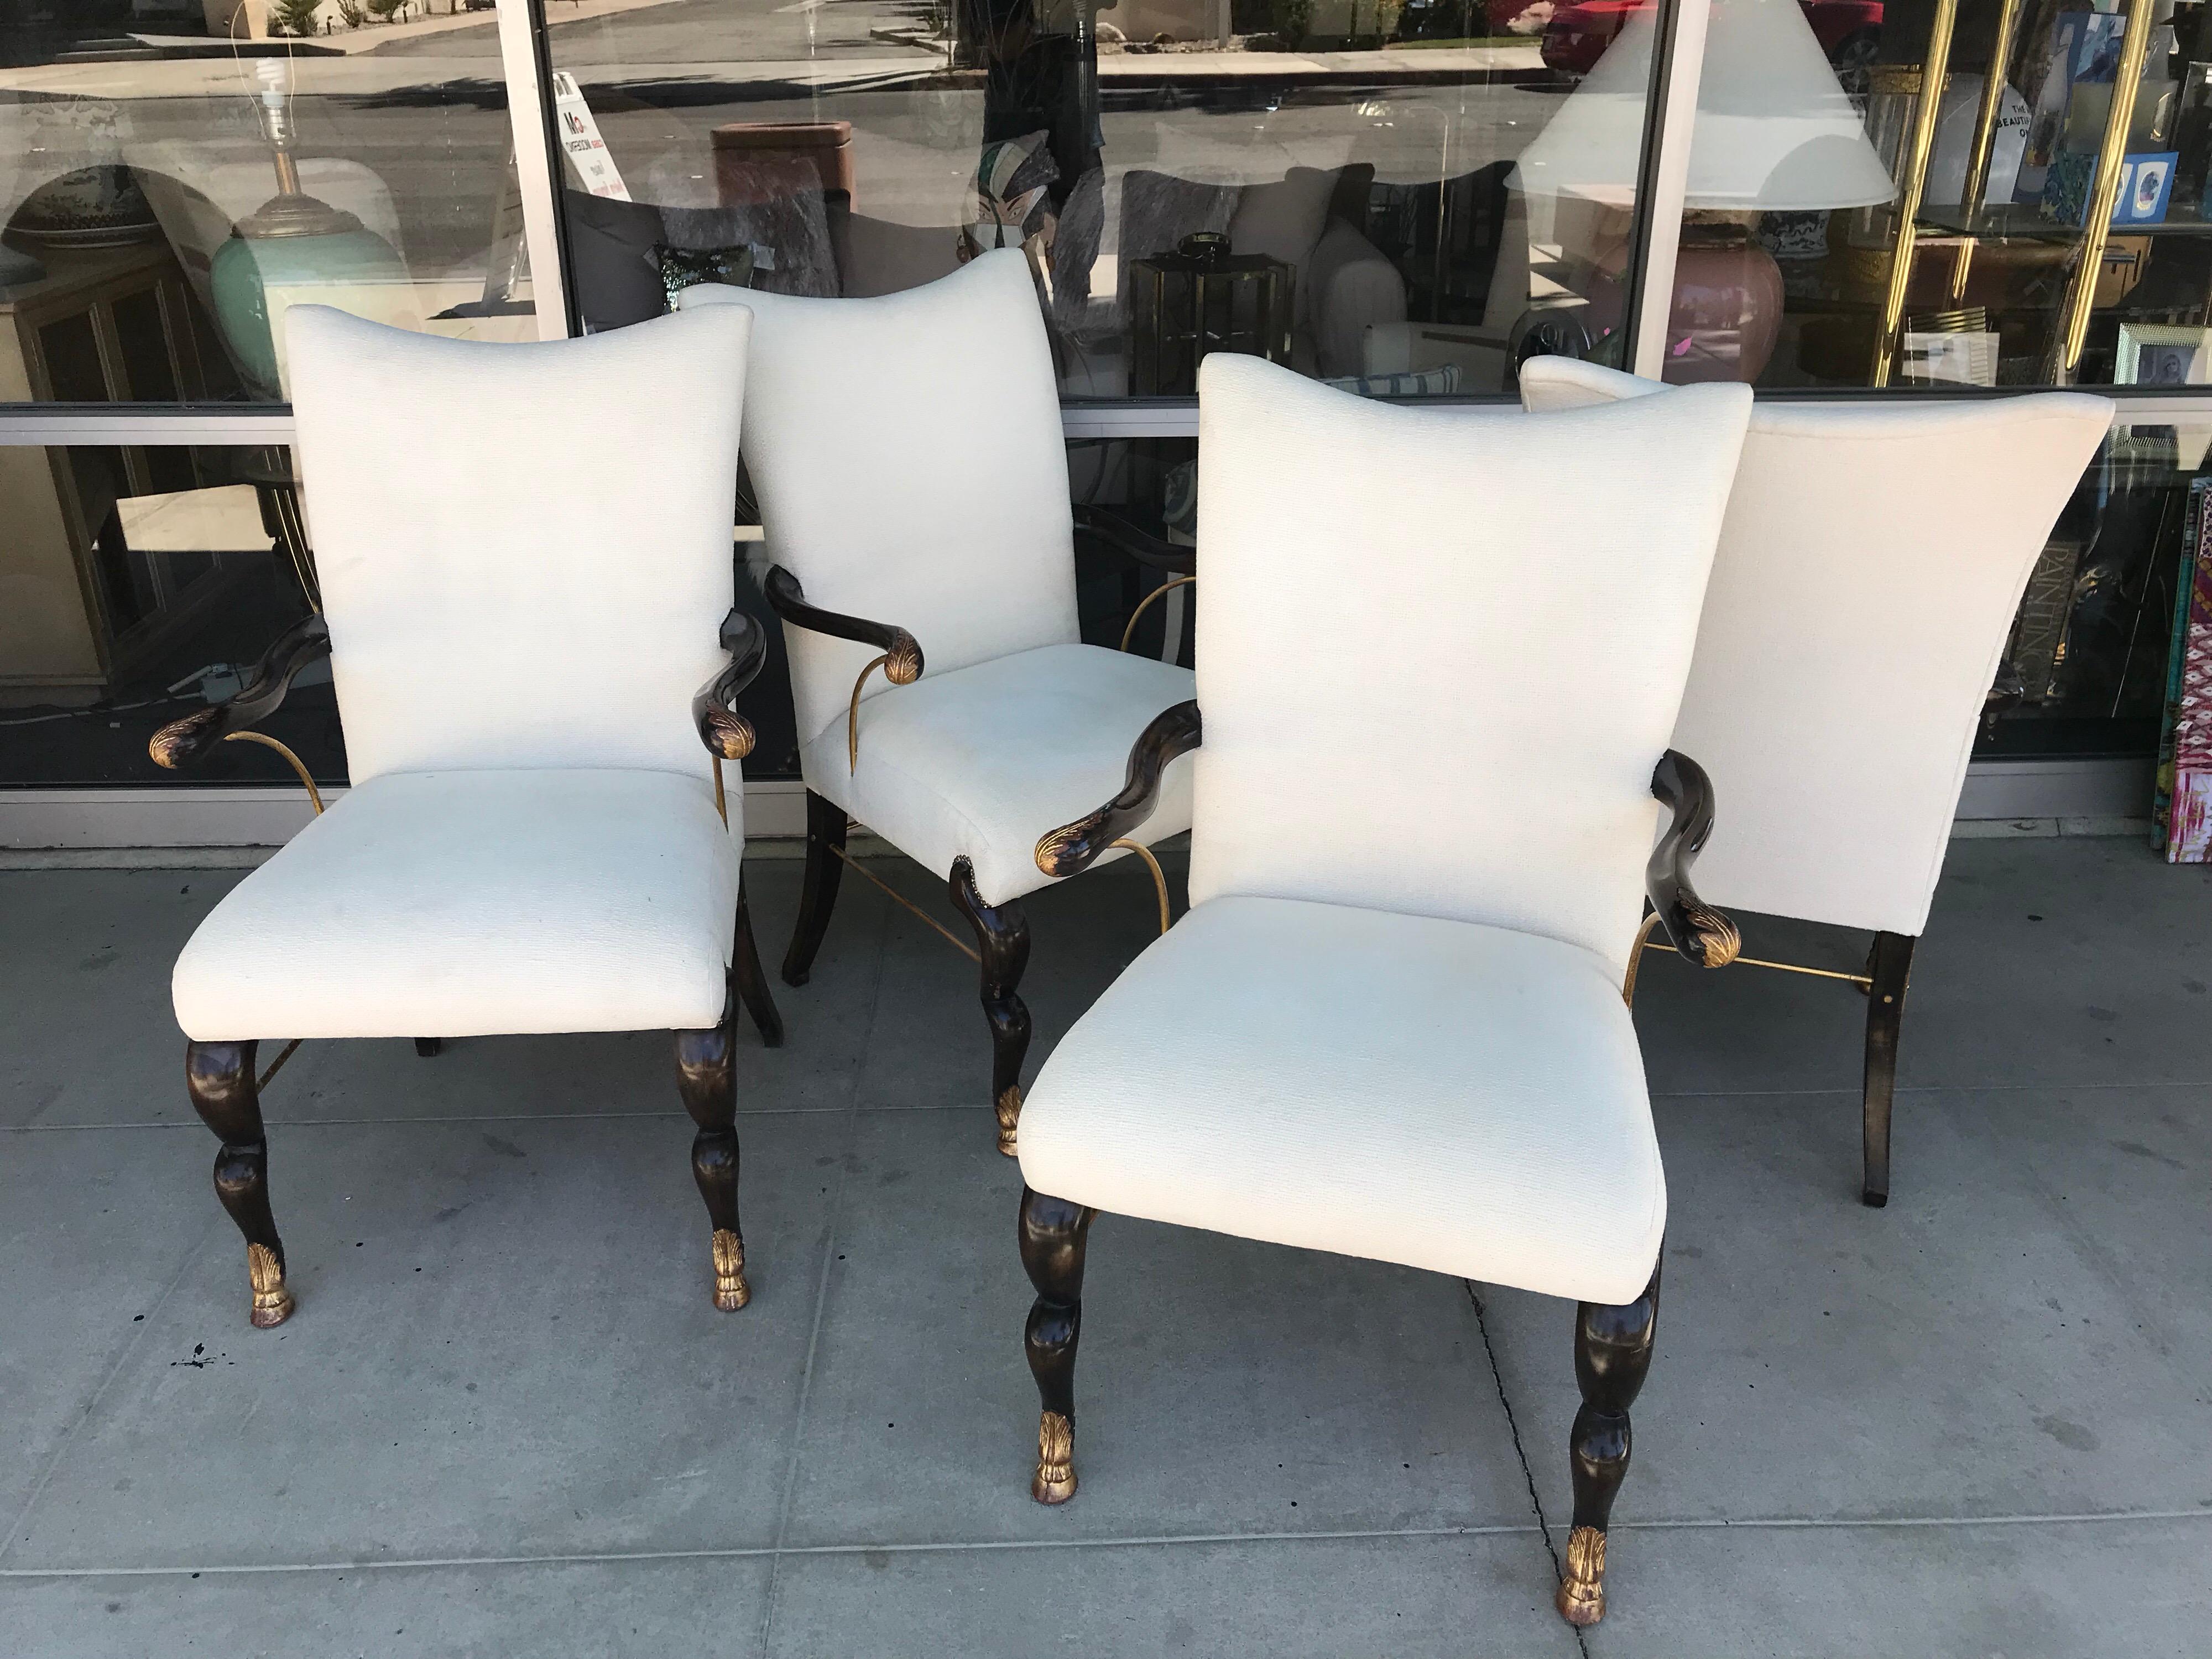 These chairs came from a amazing Rancho Mirage Estate that was so over the top in luxury and quality! The entire Estate was envisioned by the late Steve Chase. These came from the formal dining room. (2 sets of round his and her tables that sat 4